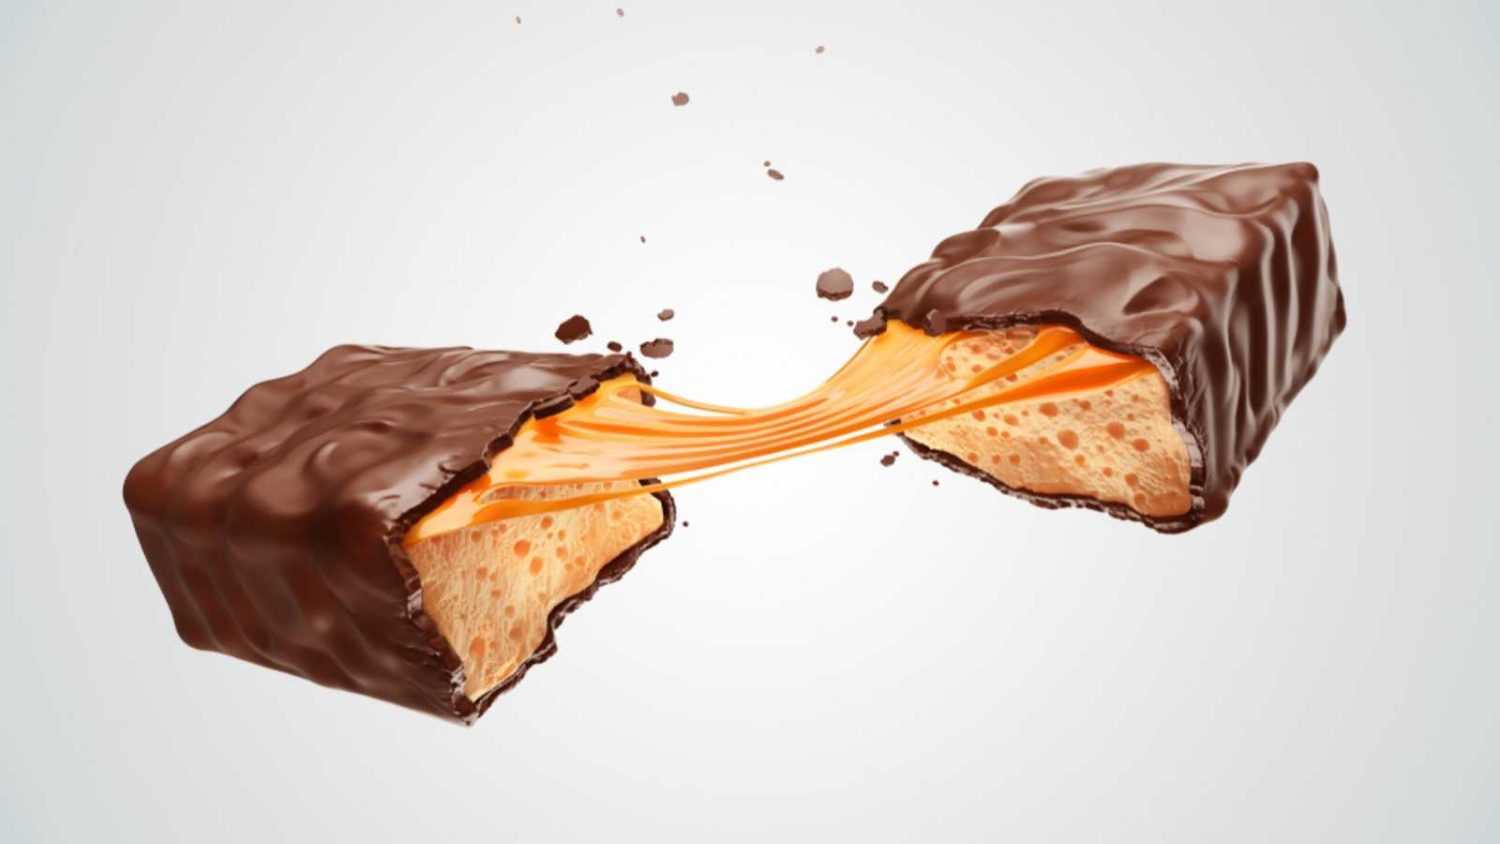 Cracked Chocolate bar with caramel, Sweet flavor, Crispy wafer, with Clipping path 3d illustration.